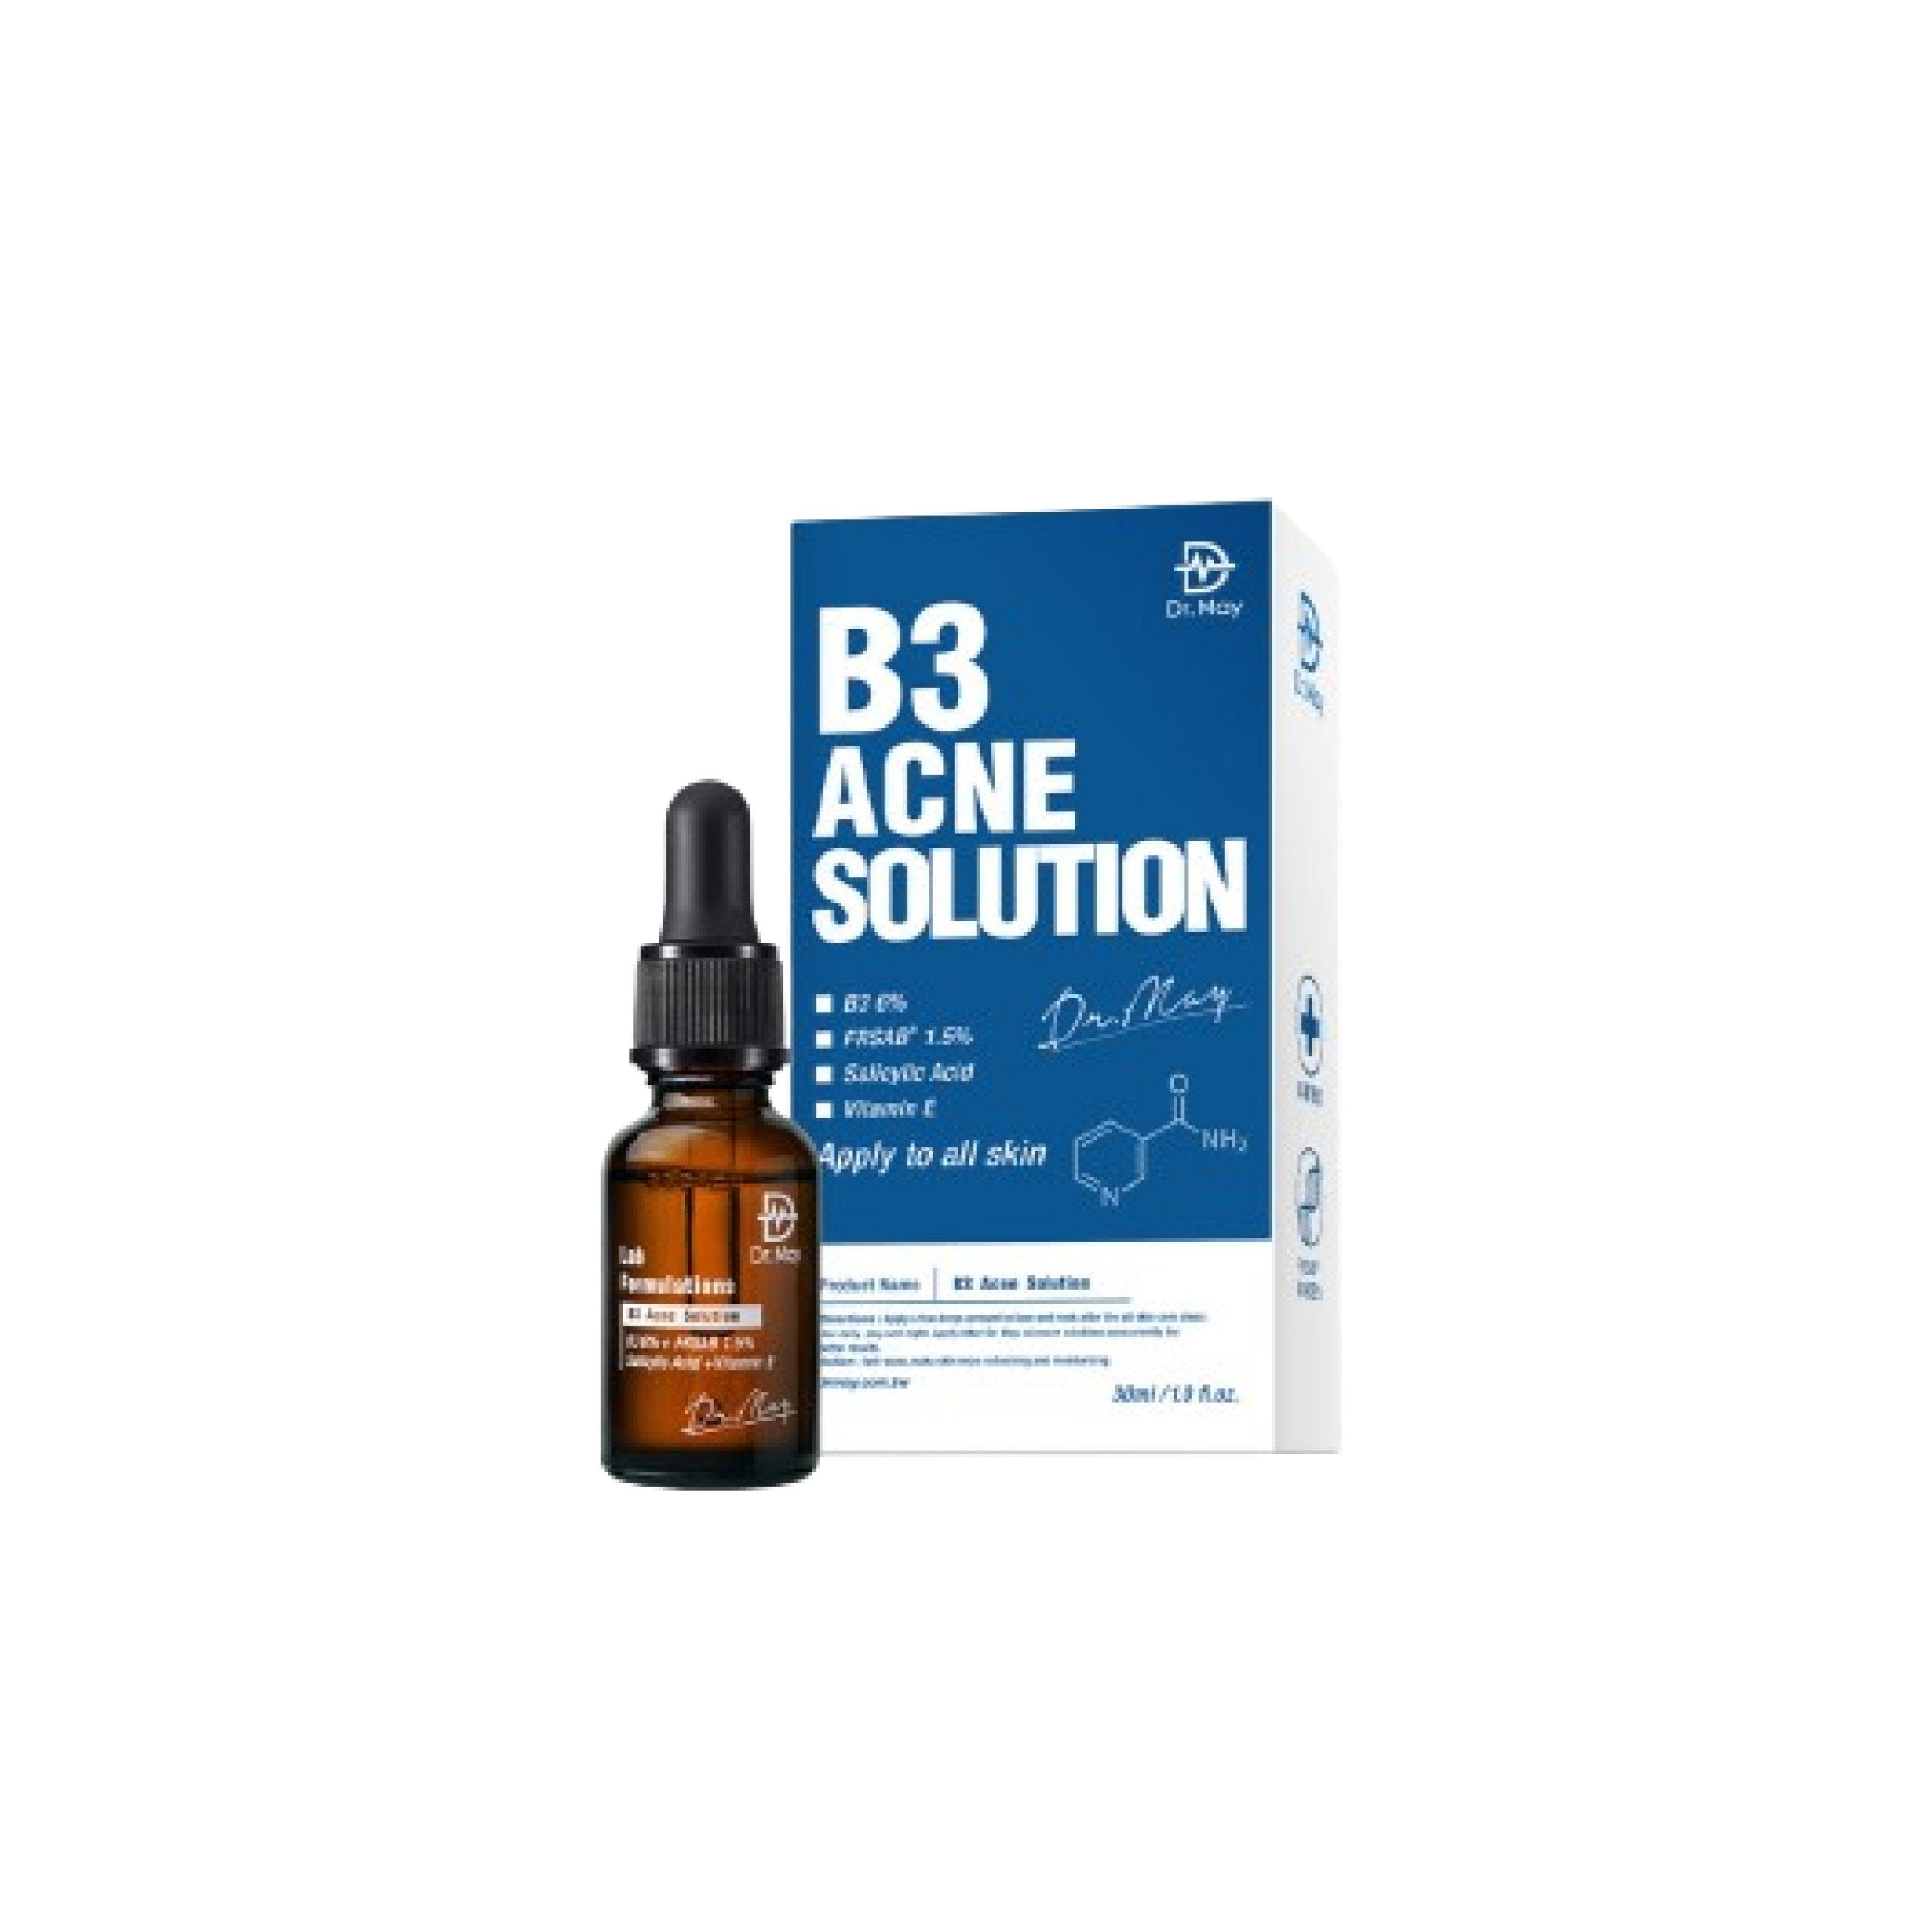 Dr.May B3 Essence Helps Improve Acne Oil Condition 10ml